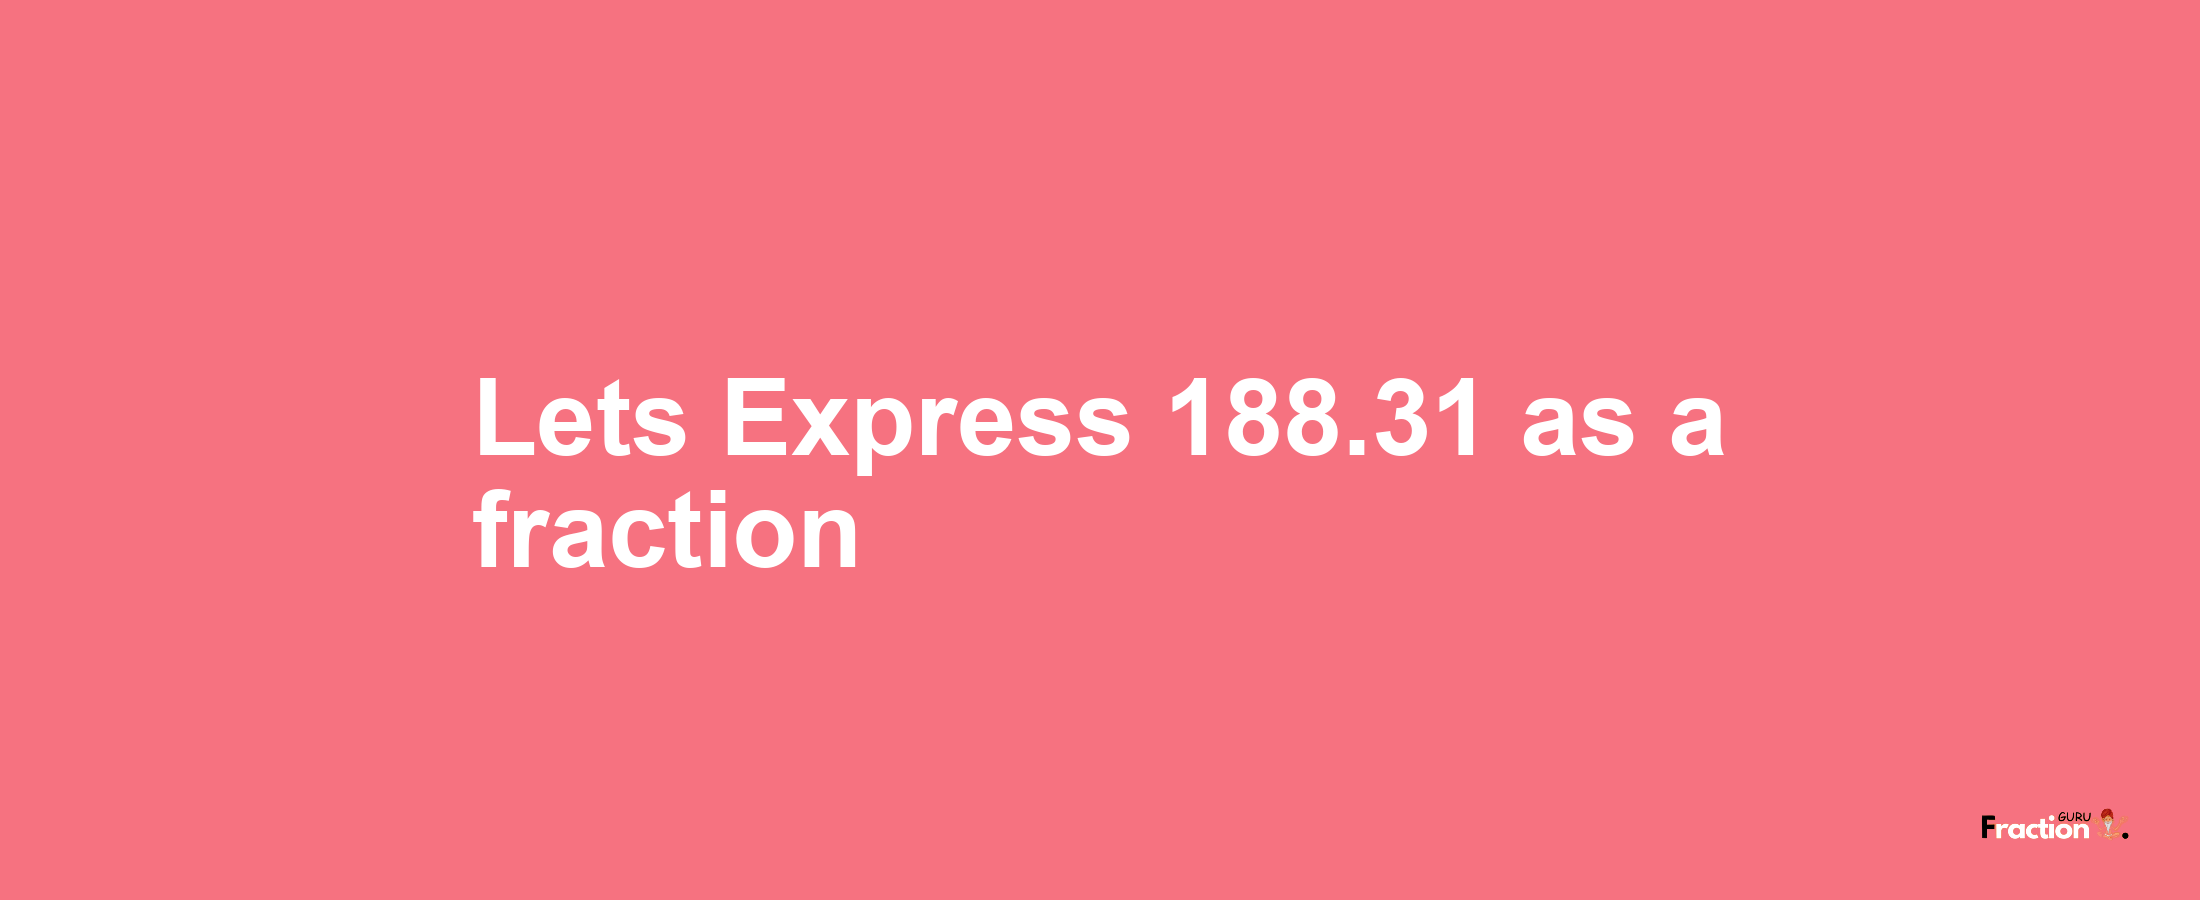 Lets Express 188.31 as afraction